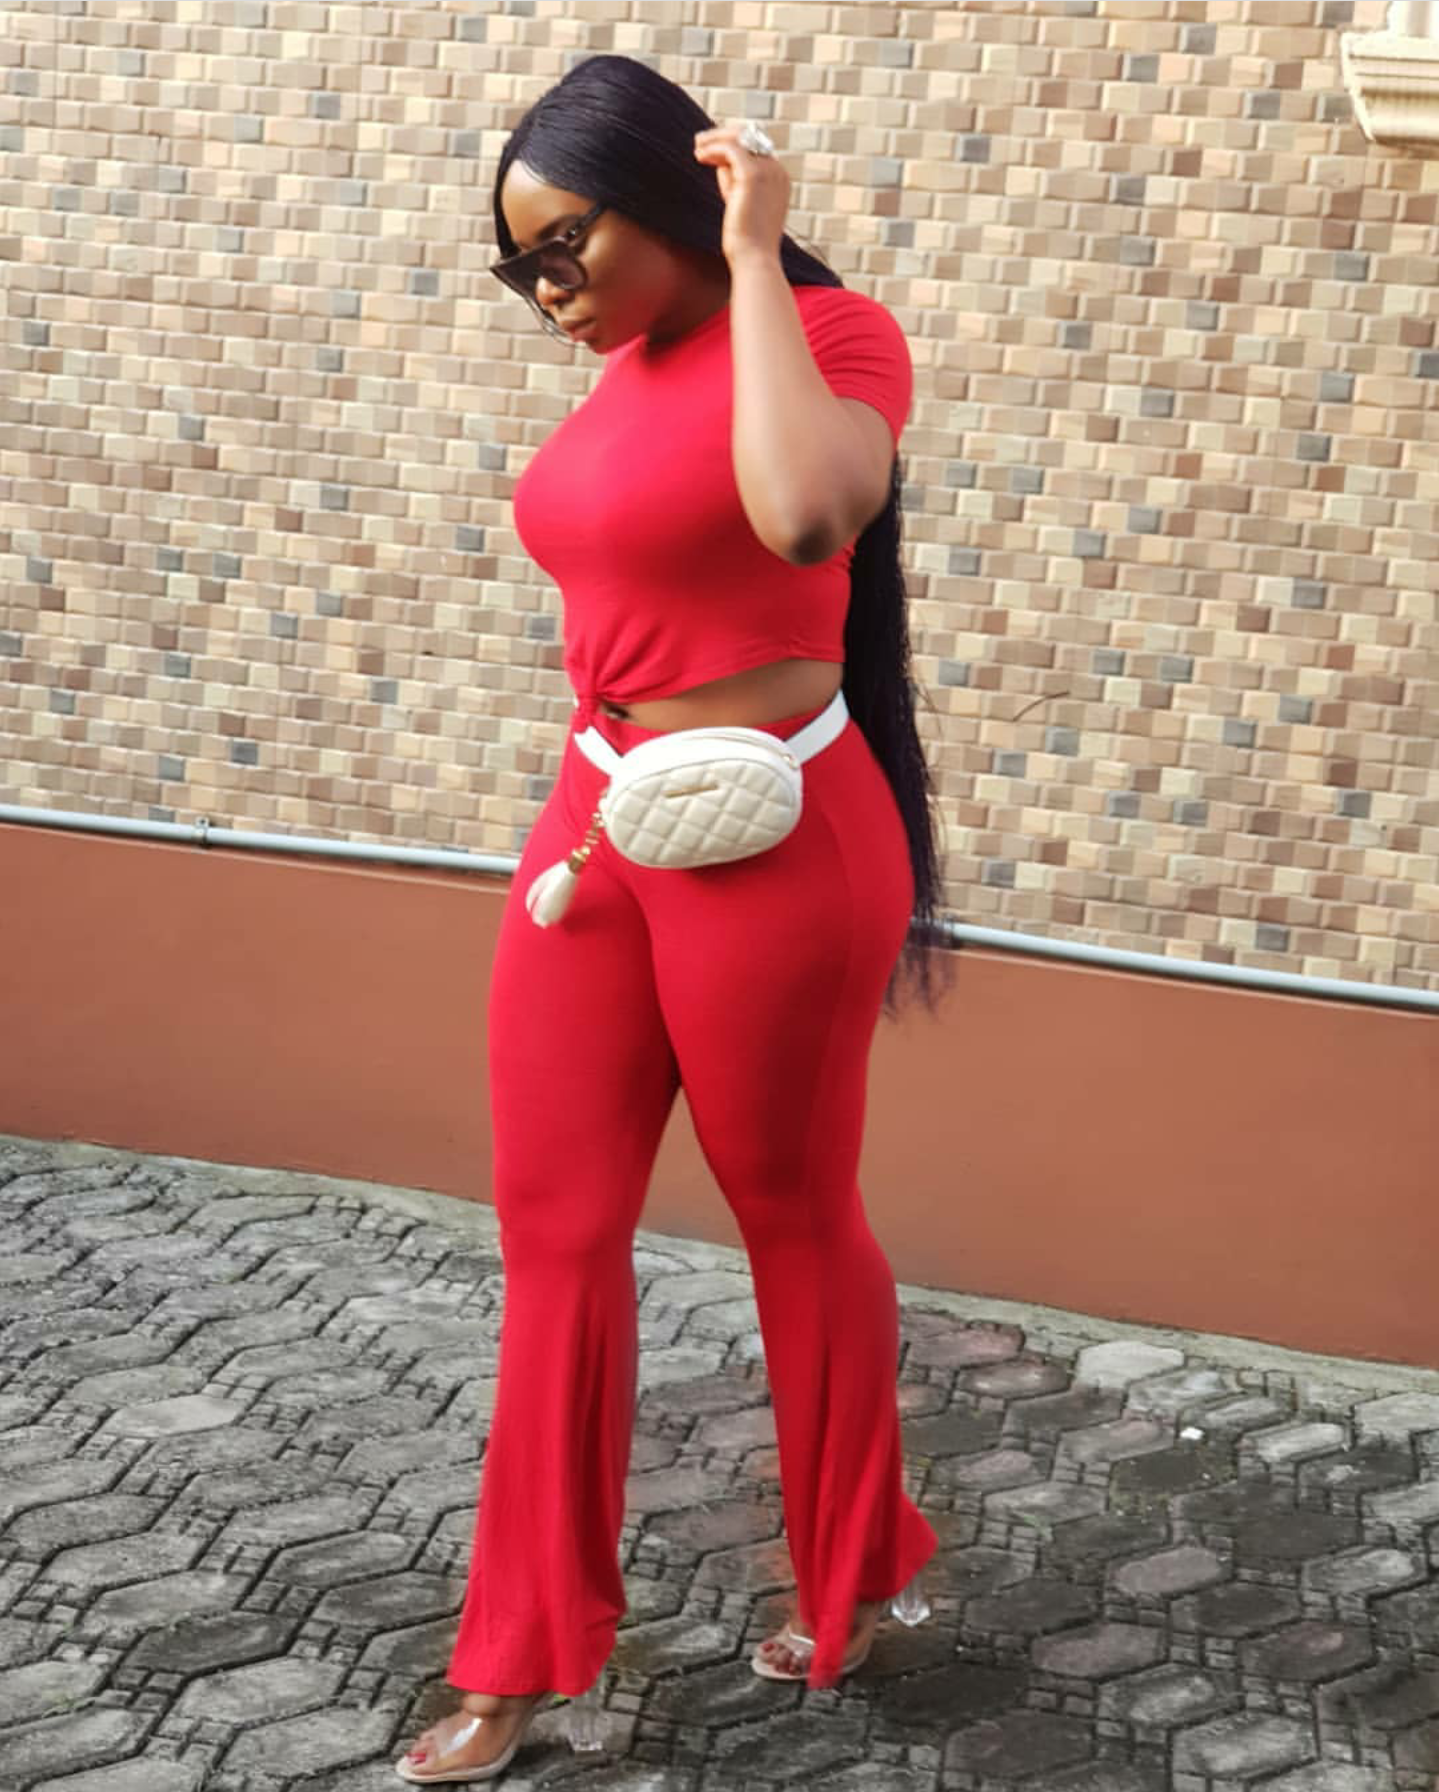 Yemi Alade was a whole slay in this two-piece flared pant and top with her fanny pack